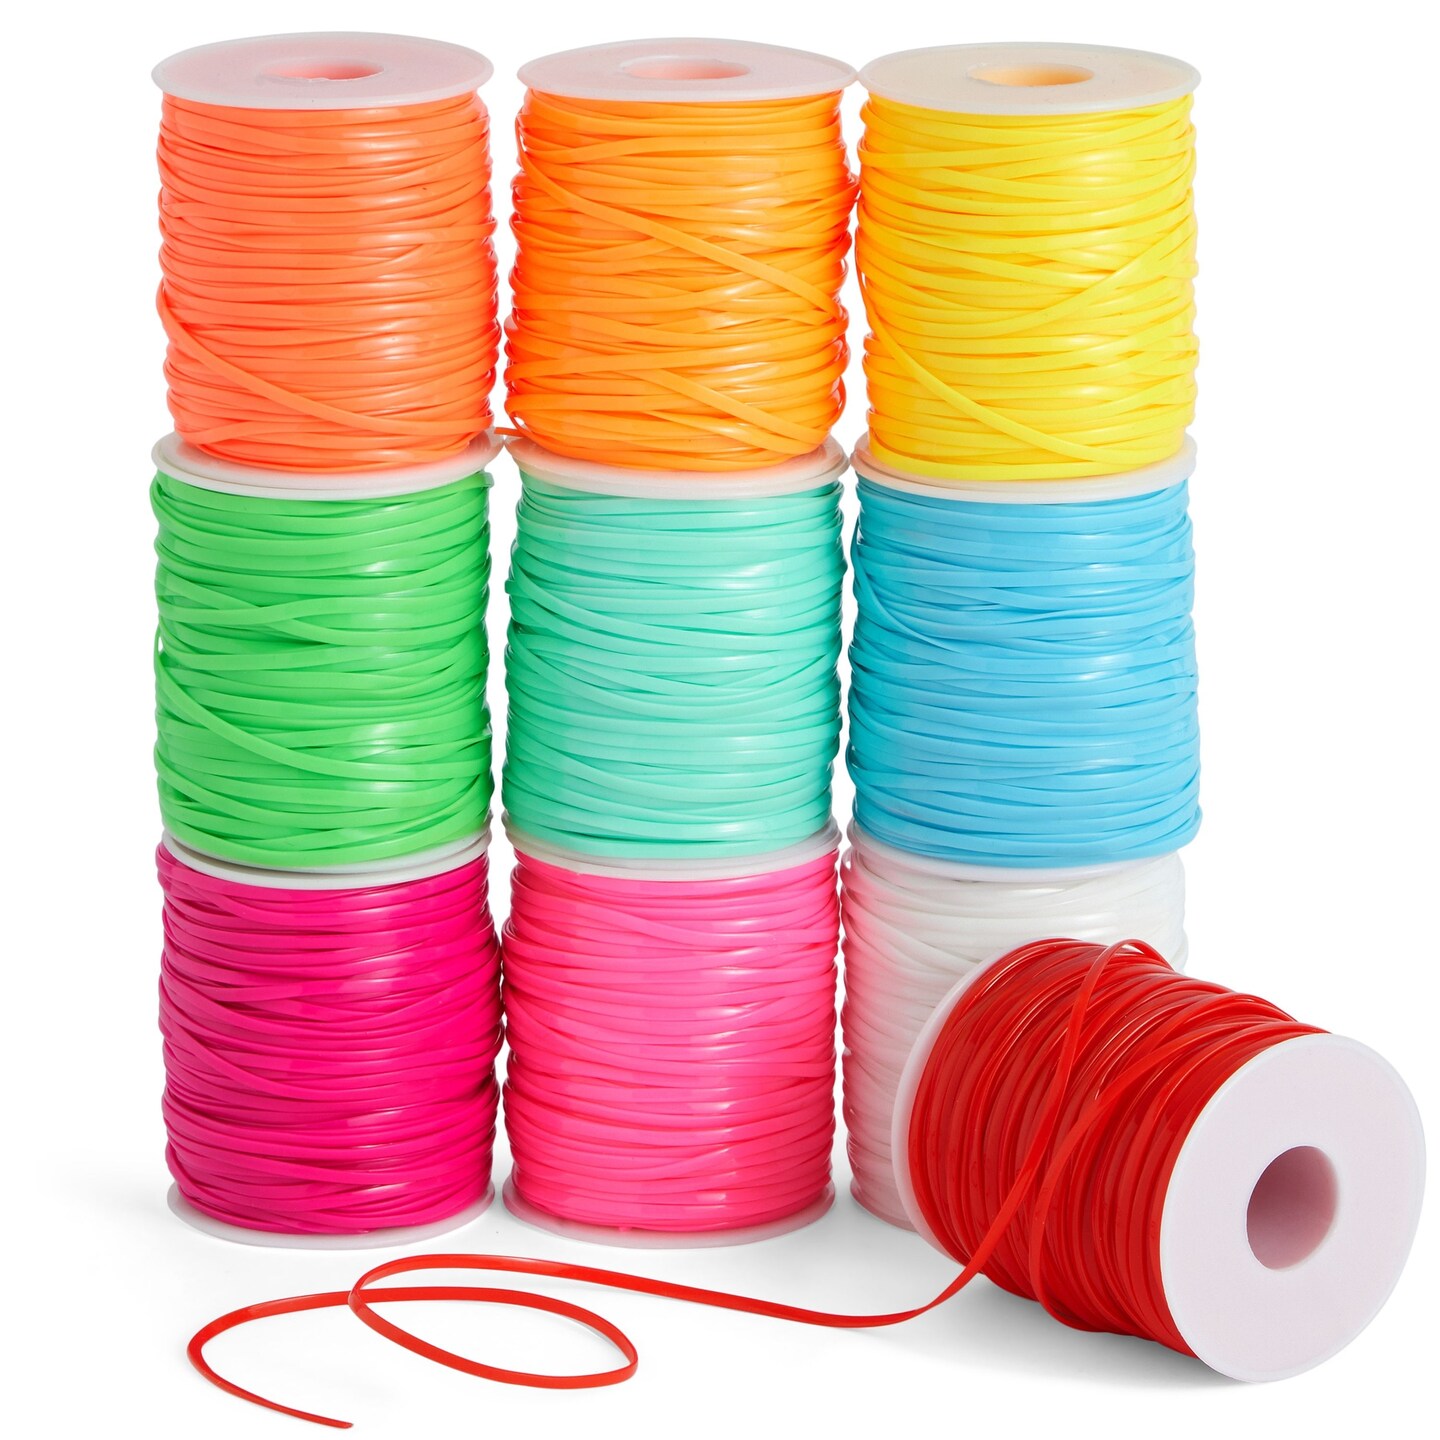 10 Spools of Plastic Gimp String in 10 Neon Colors, 50 Yards Each for  Bracelets, Necklaces, Boondoggle Keychains, Lanyard Cord